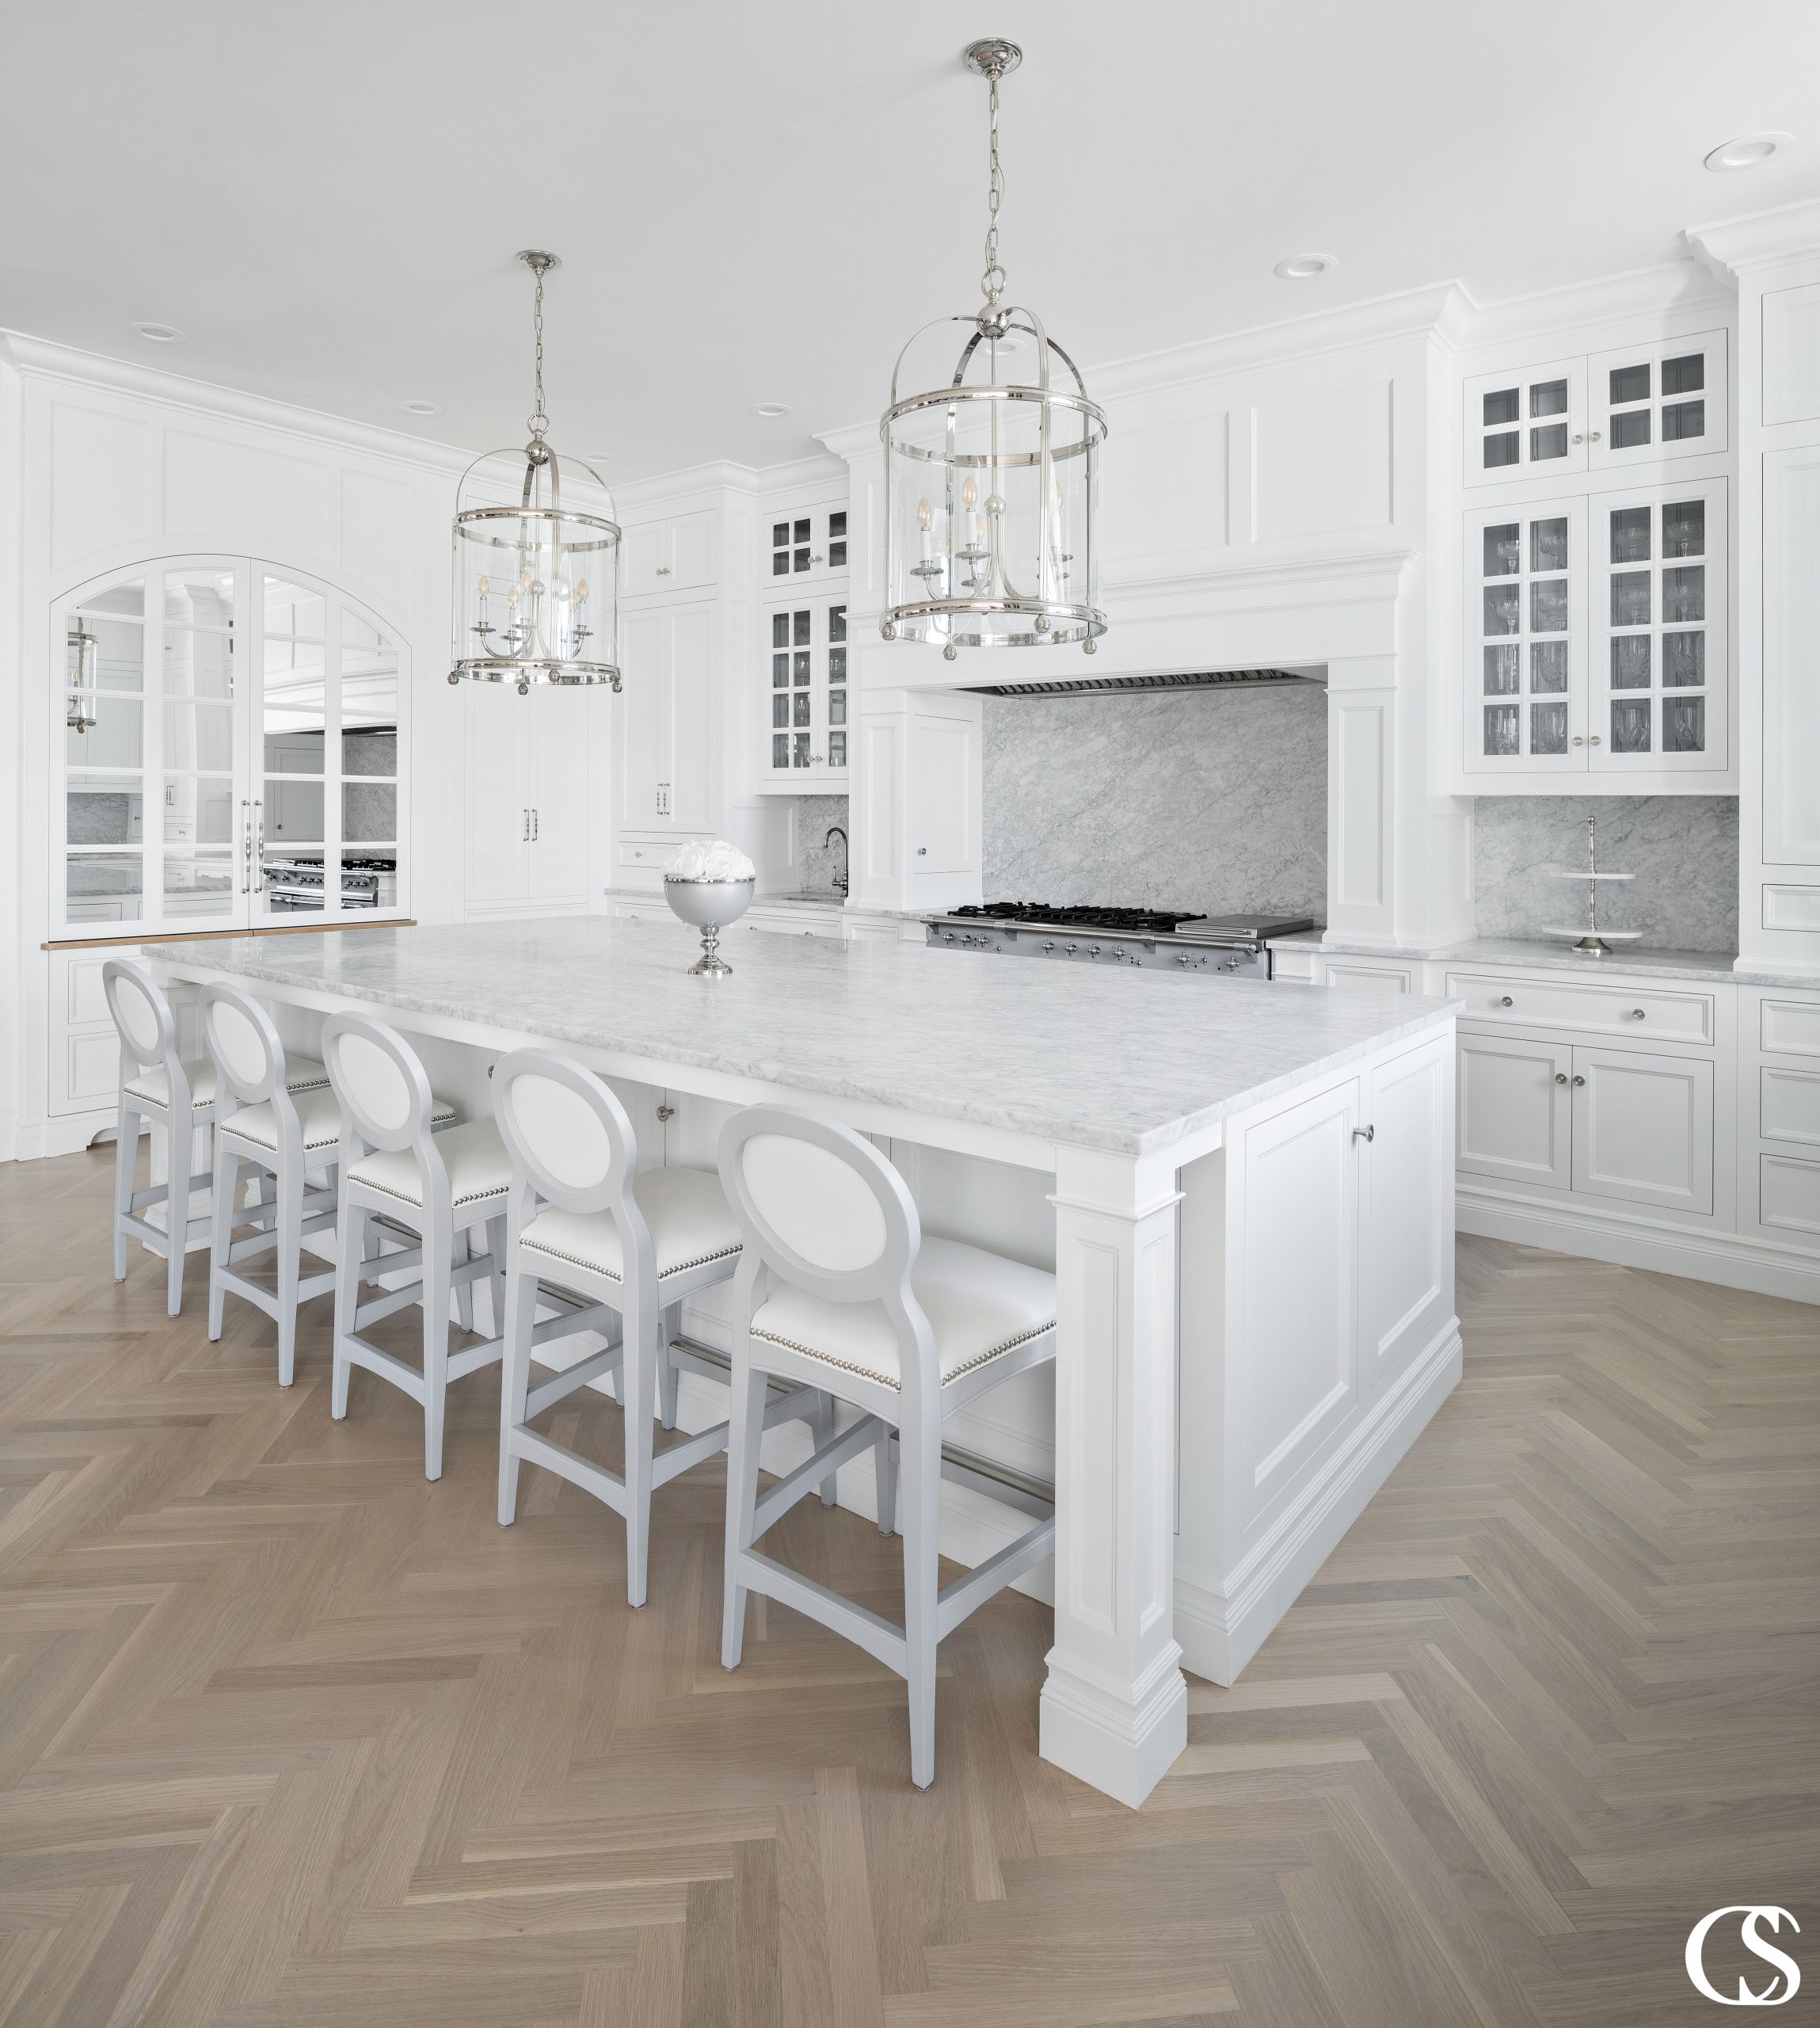 Consider how you want to store pots, blenders, hot pads, tupperware lids, cooking utensils and every other component you anticipate using. These are all areas where a custom cabinet designer can create the best custom kitchen cabinets for you.